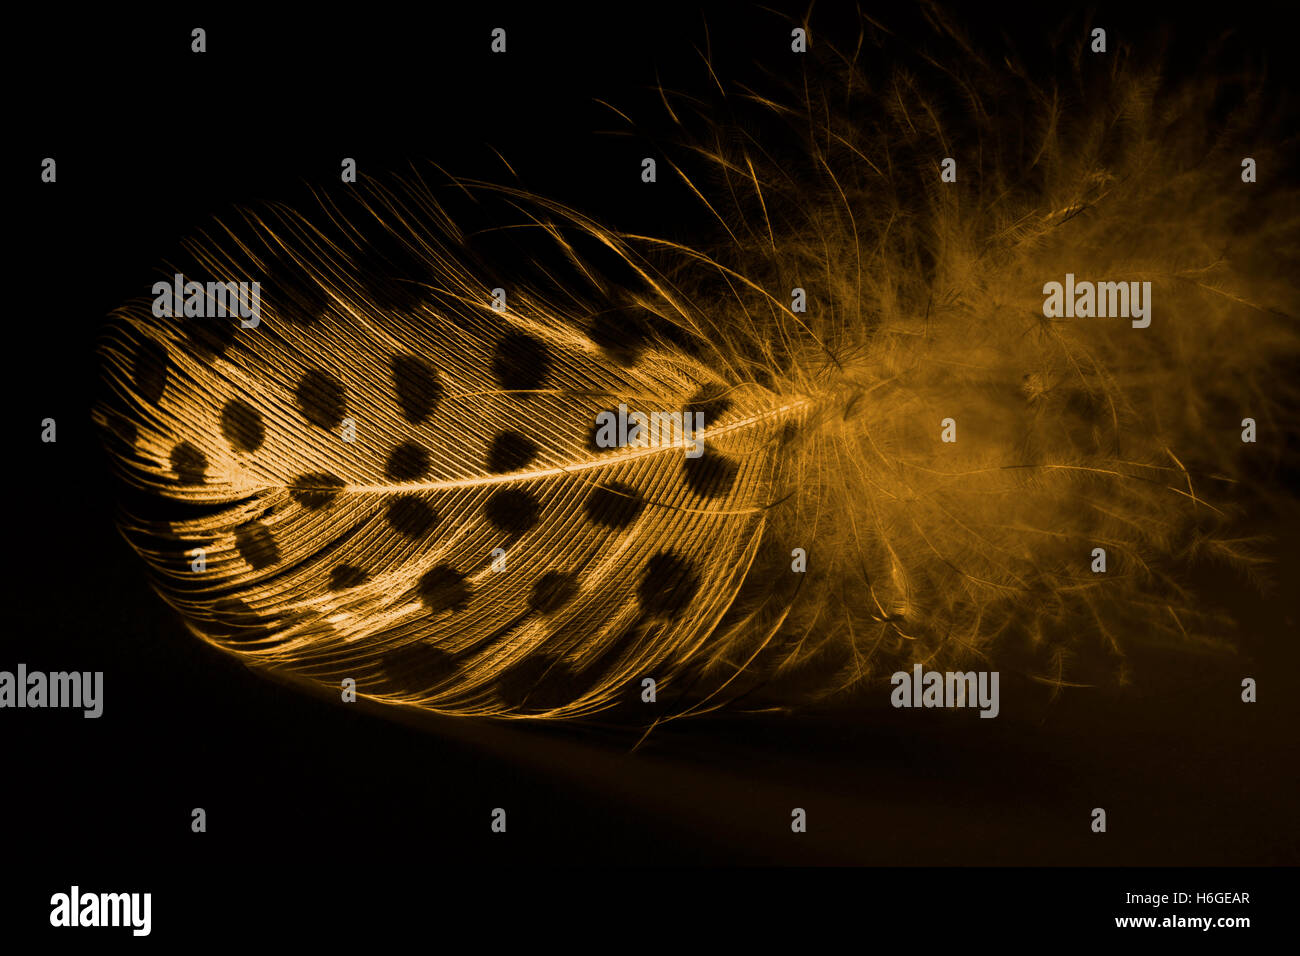 A golden feather with black dots on a black badground Stock Photo